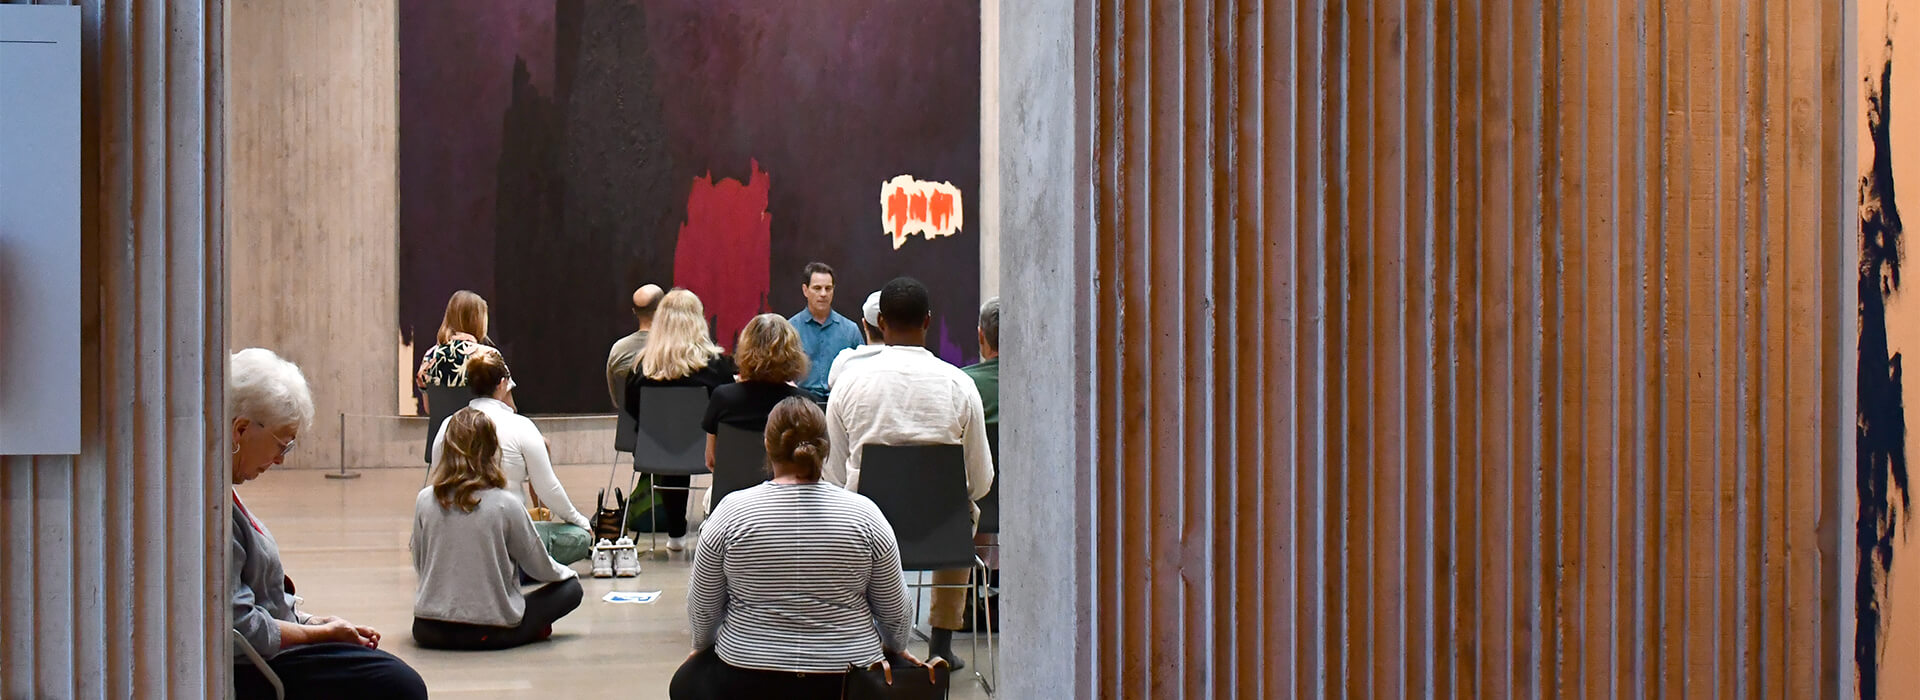 People meditating in an art museum